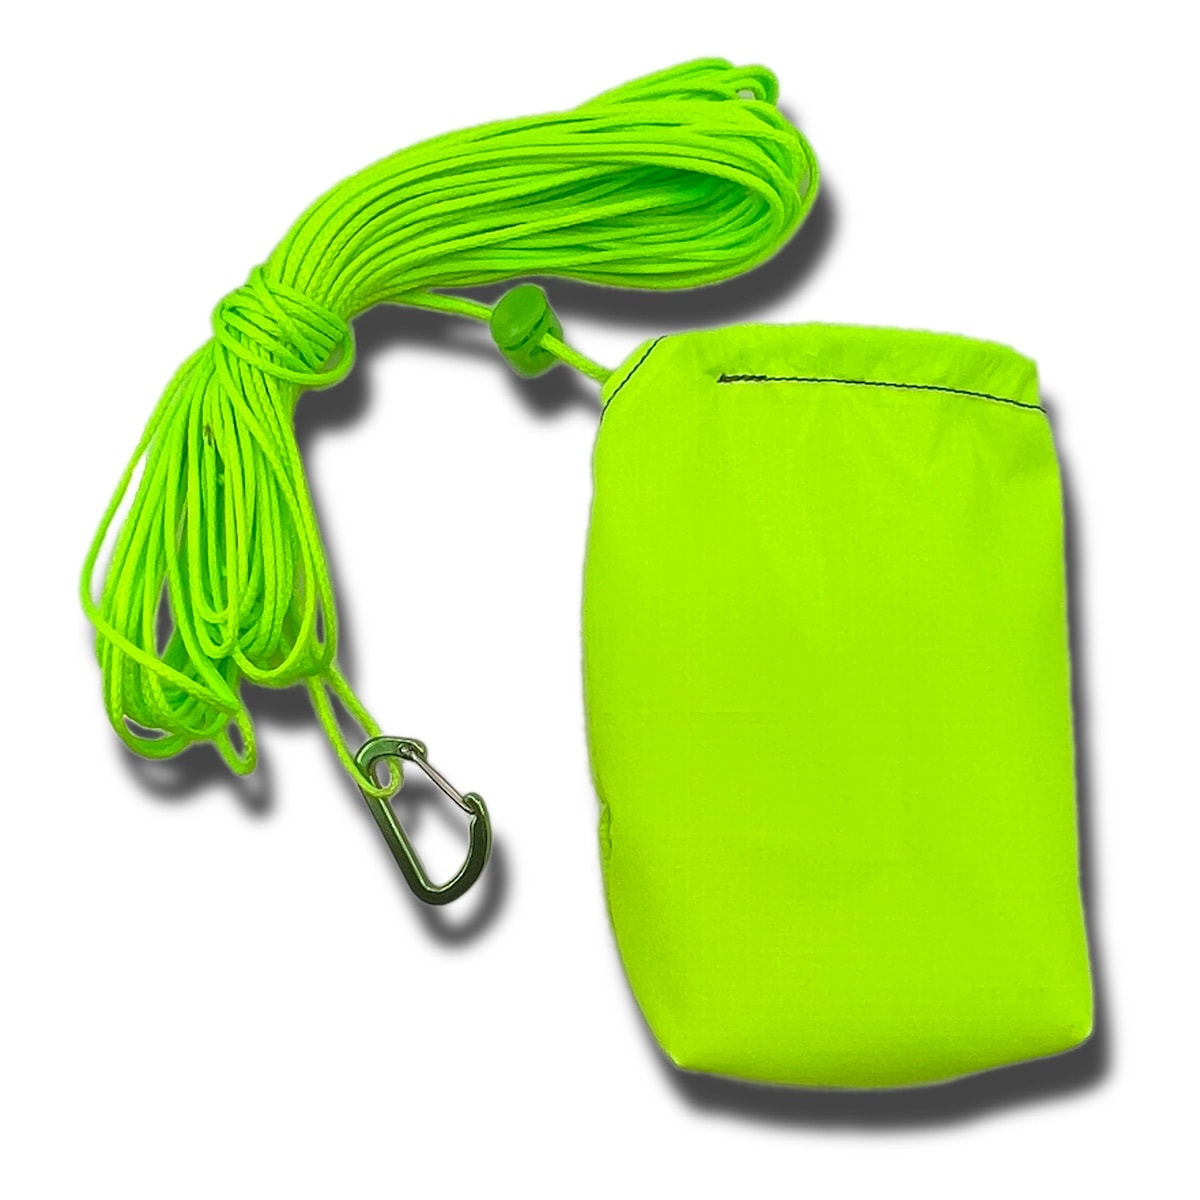 Ultralight weight Rock sack and throw line for PCT style bear bag